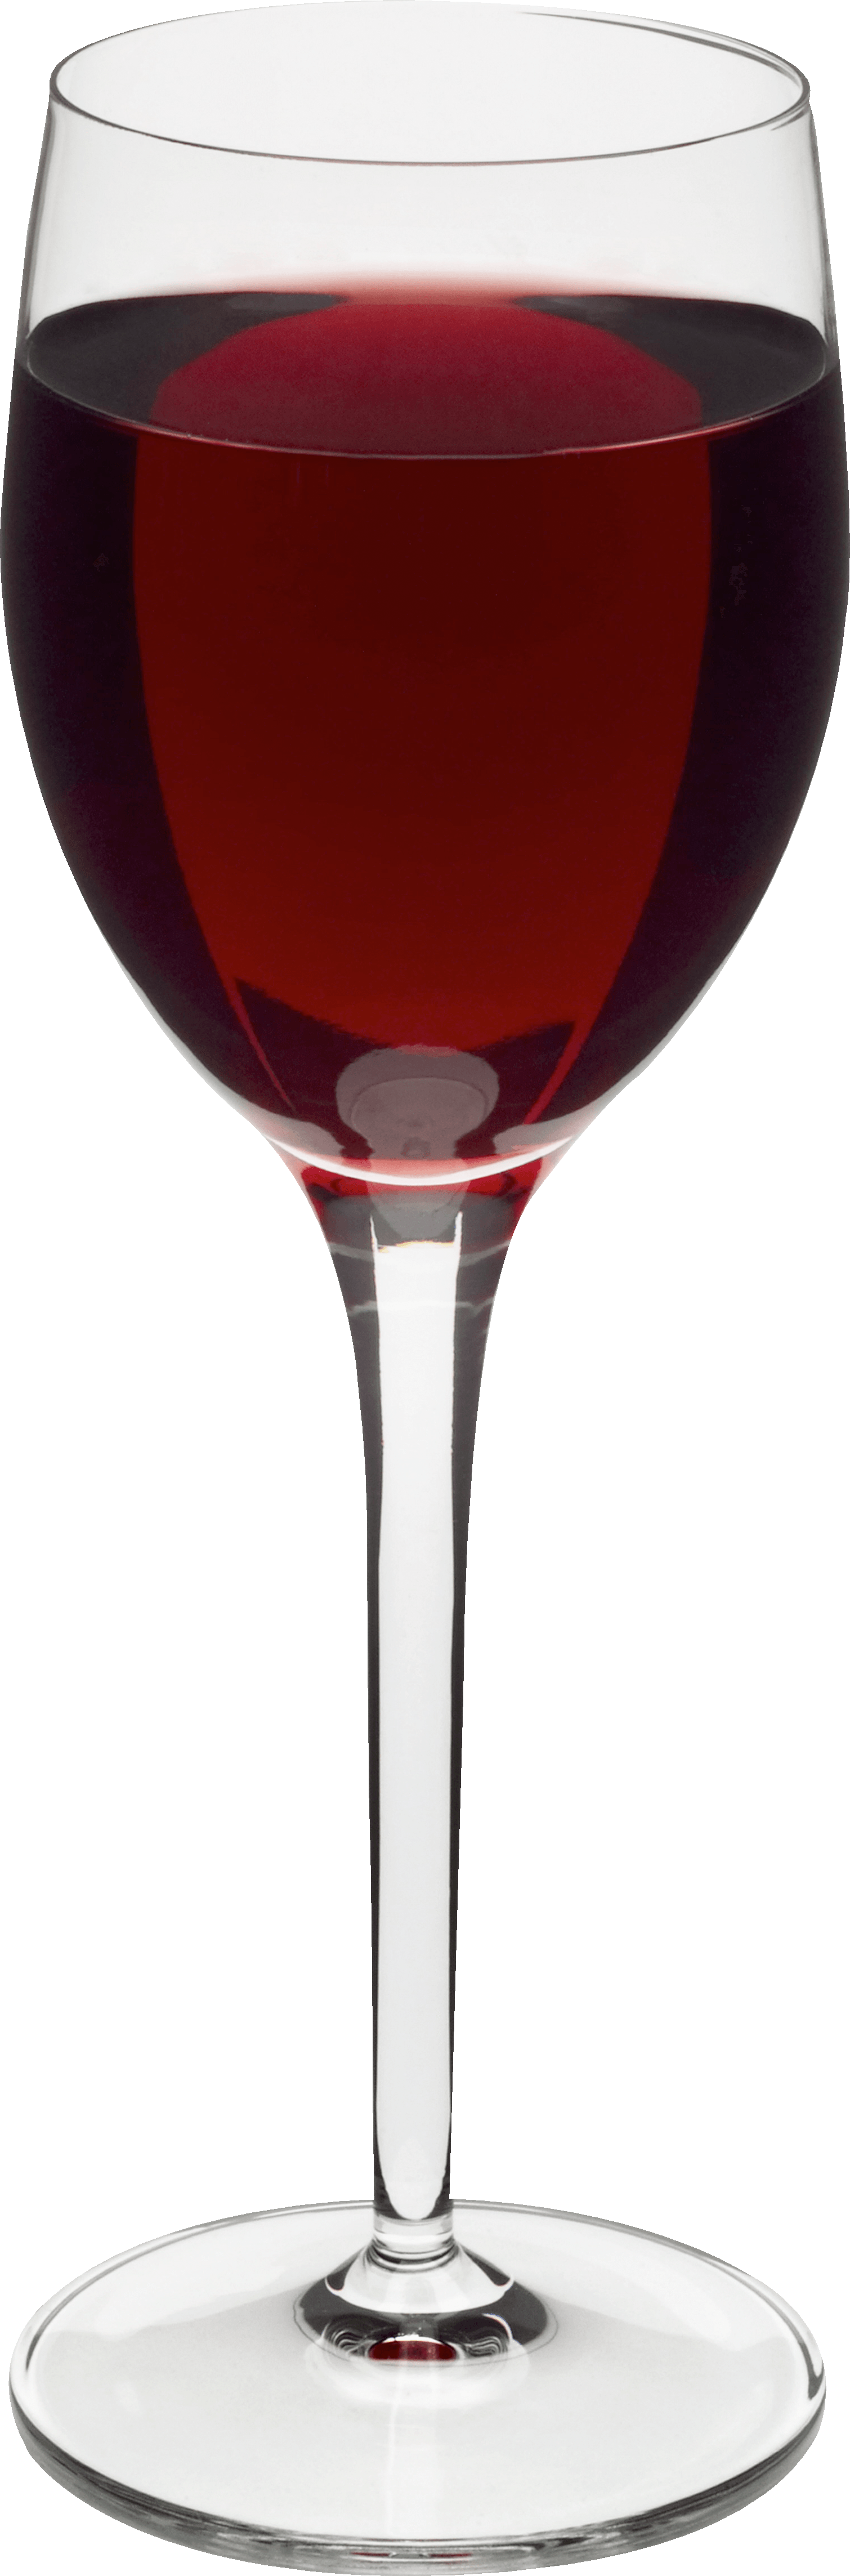 Glass Png Image PNG Image